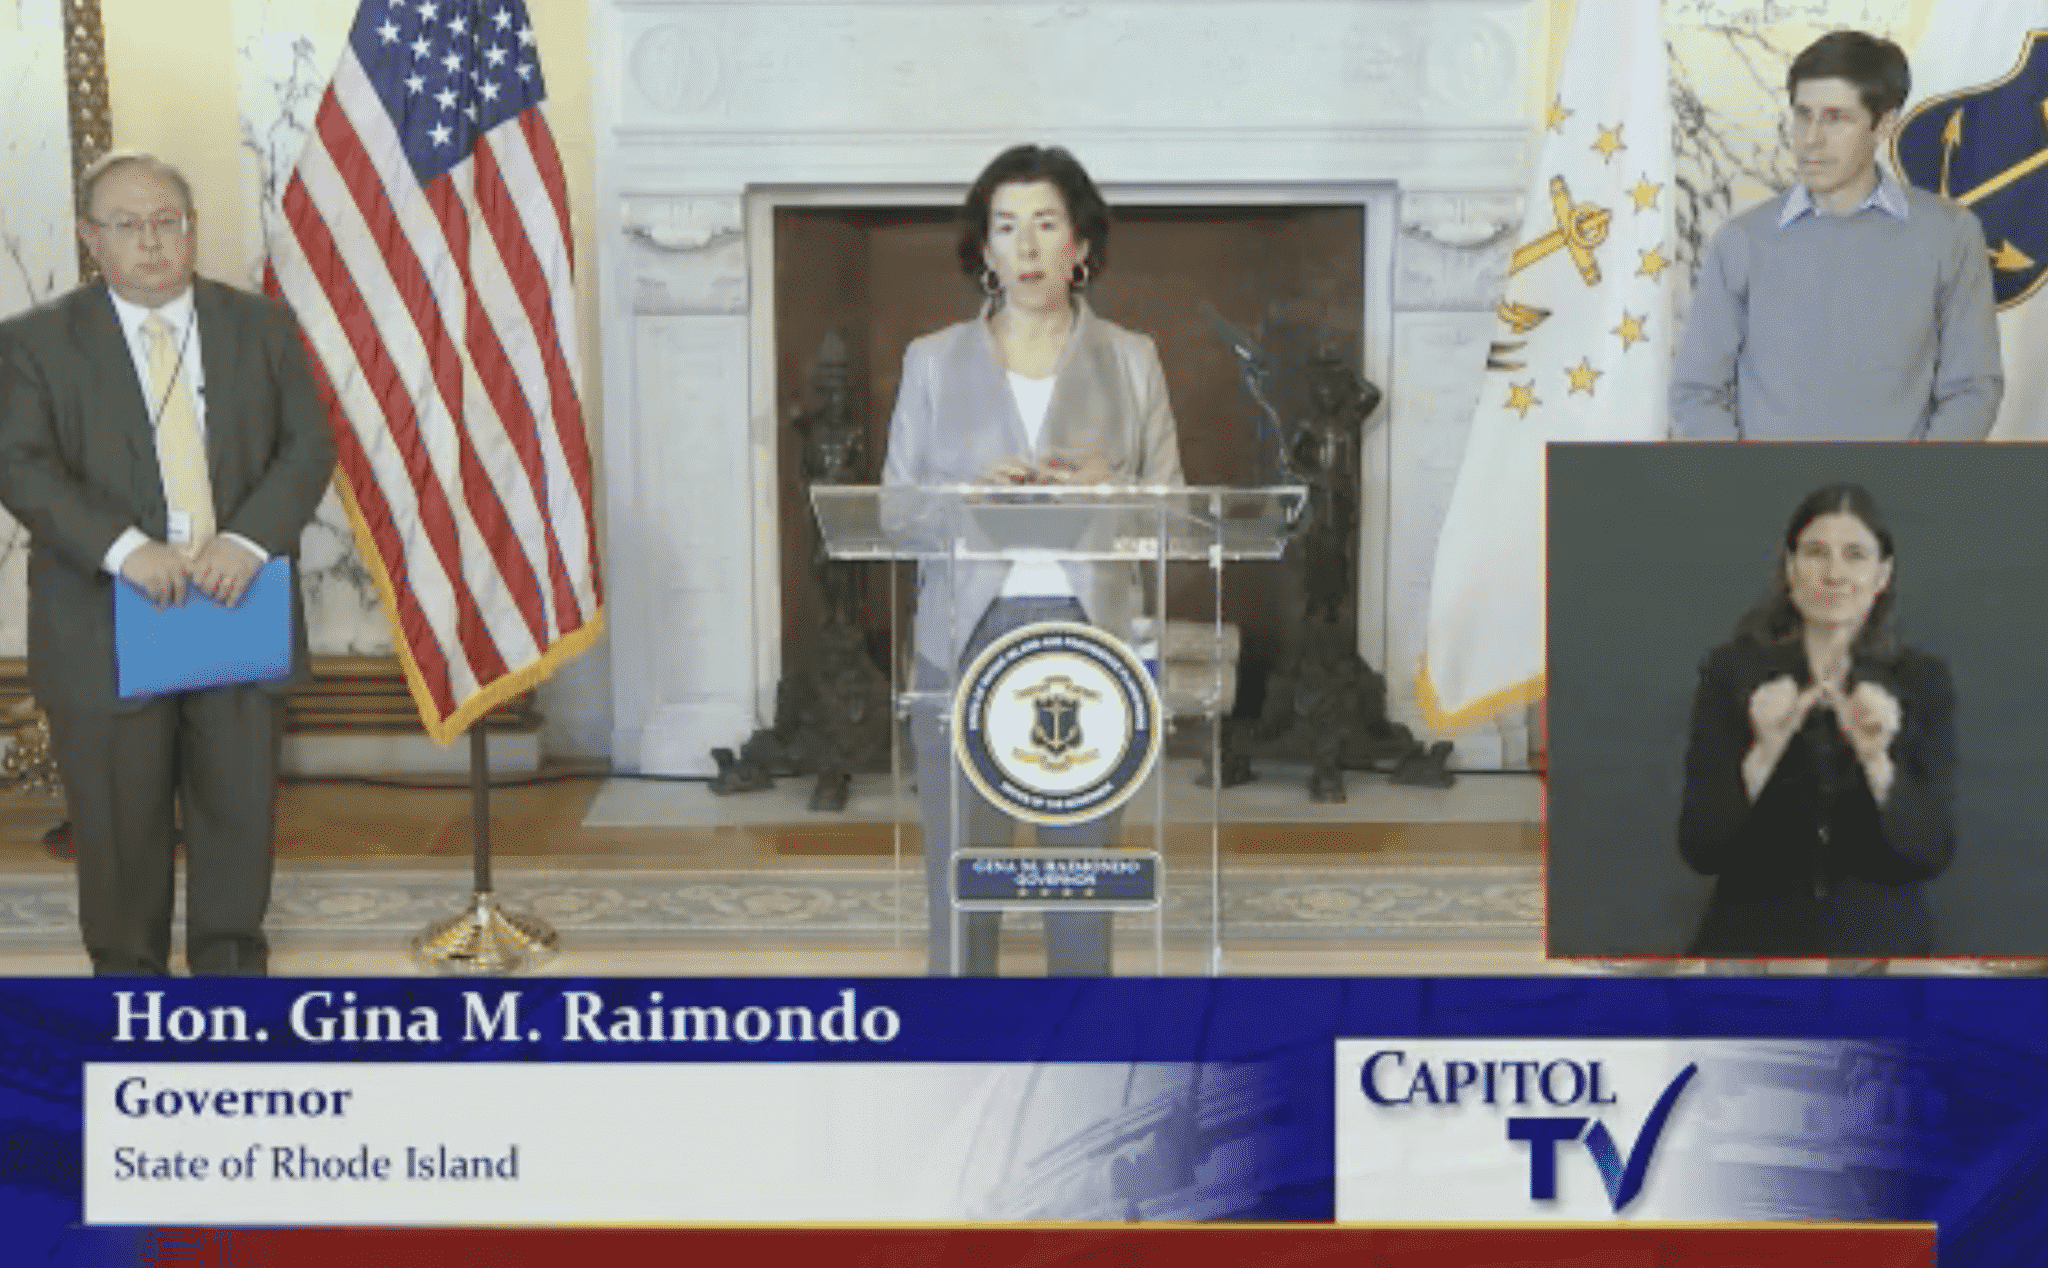 [CREDIT: RIDOH] RI COVID-19 cases slowed this weekend Gov. Ginal Raimondo reported during her May 19 briefing on the outbreak, good news attributed to social distancing and stay-home efforts.